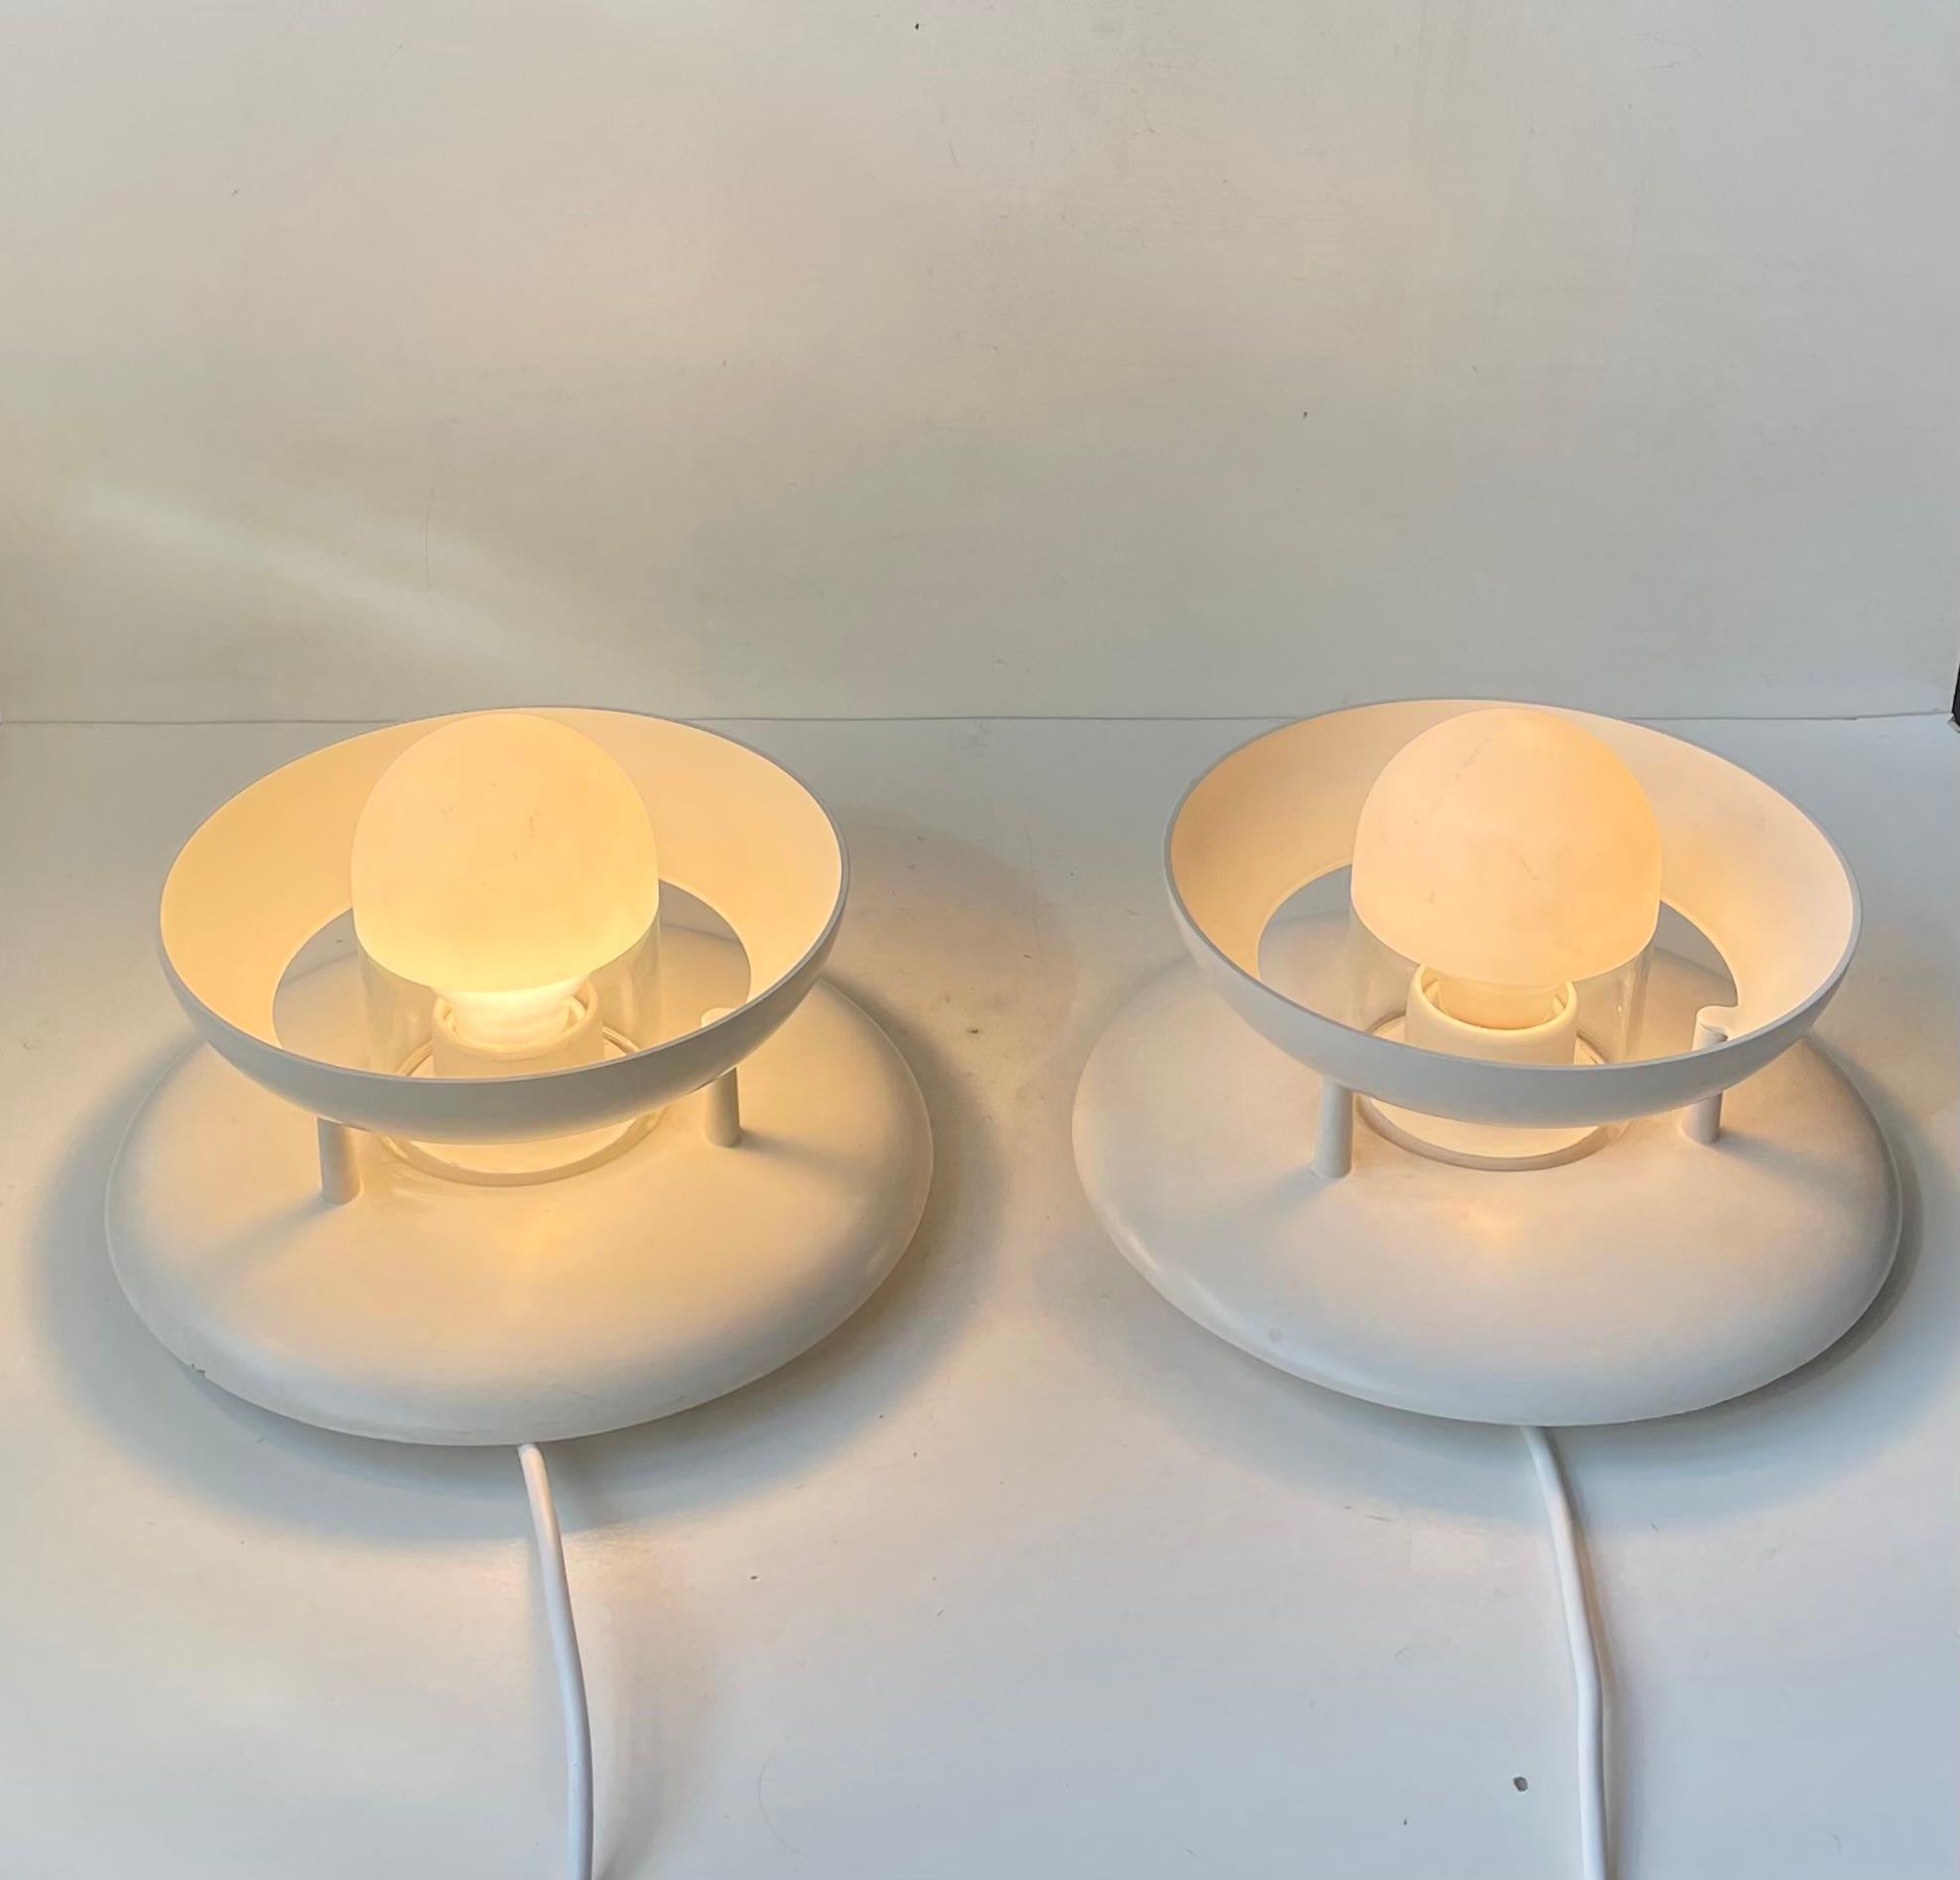 A set of white multi-purpose lamps that can be installed either as wall or ceiling lights. They are called Safir and these are the largest version of the Safir series. Designed by Marianne Tuxen during the 1980s or early 90s and manufactured by